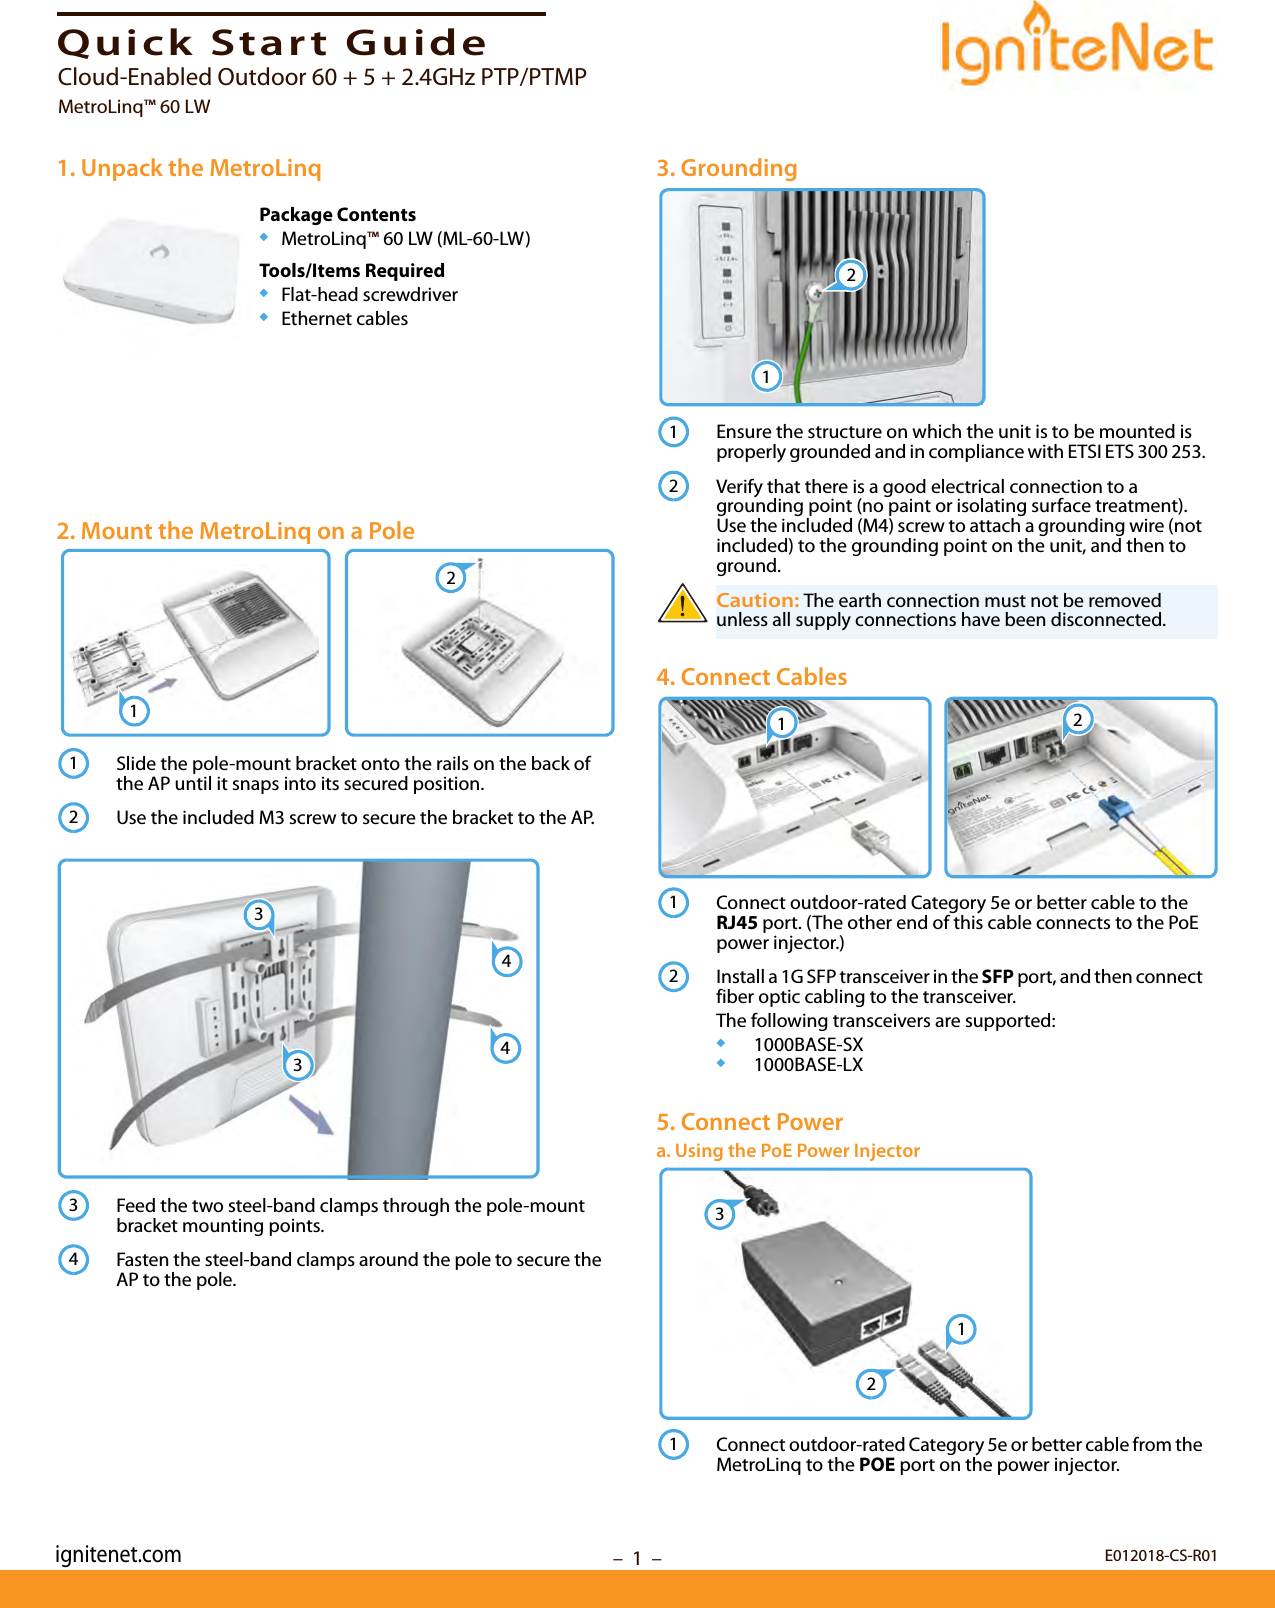 –  1  –Quick Start Guide1. Unpack the MetroLinqPackage Contents◆MetroLinq™ 60 LW (ML-60-LW)Tools/Items Required◆Flat-head screwdriver◆Ethernet cables2. Mount the MetroLinq on a PoleSlide the pole-mount bracket onto the rails on the back of the AP until it snaps into its secured position.Use the included M3 screw to secure the bracket to the AP.Feed the two steel-band clamps through the pole-mount bracket mounting points.Fasten the steel-band clamps around the pole to secure the AP to the pole.12123344343. GroundingEnsure the structure on which the unit is to be mounted is properly grounded and in compliance with ETSI ETS 300 253.Verify that there is a good electrical connection to a grounding point (no paint or isolating surface treatment). Use the included (M4) screw to attach a grounding wire (not included) to the grounding point on the unit, and then to ground.Caution: The earth connection must not be removed unless all supply connections have been disconnected.4. Connect CablesConnect outdoor-rated Category 5e or better cable to the RJ45 port. (The other end of this cable connects to the PoE power injector.)Install a 1G SFP transceiver in the SFP port, and then connect fiber optic cabling to the transceiver. The following transceivers are supported:◆1000BASE-SX◆1000BASE-LX5. Connect Powera. Using the PoE Power InjectorConnect outdoor-rated Category 5e or better cable from the MetroLinq to the POE port on the power injector.121221121231E012018-CS-R01ignitenet.comCloud-Enabled Outdoor 60 + 5 + 2.4GHz PTP/PTMPMetroLinq™ 60 LW 